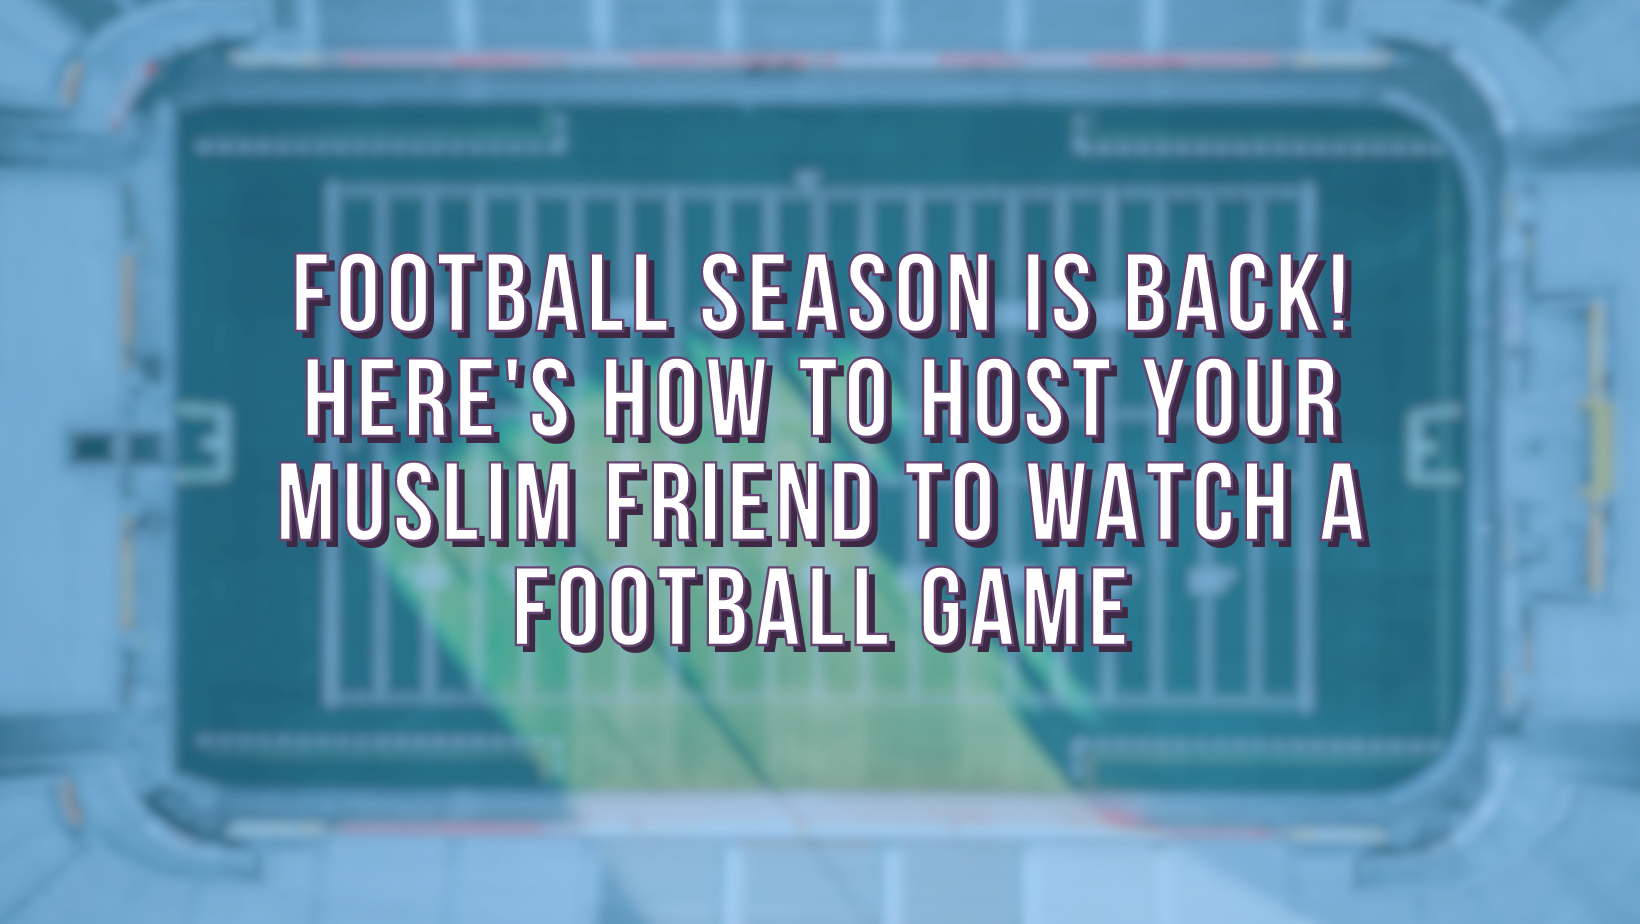 Football season is back! Here's how to host your Muslim friend to watch a football game